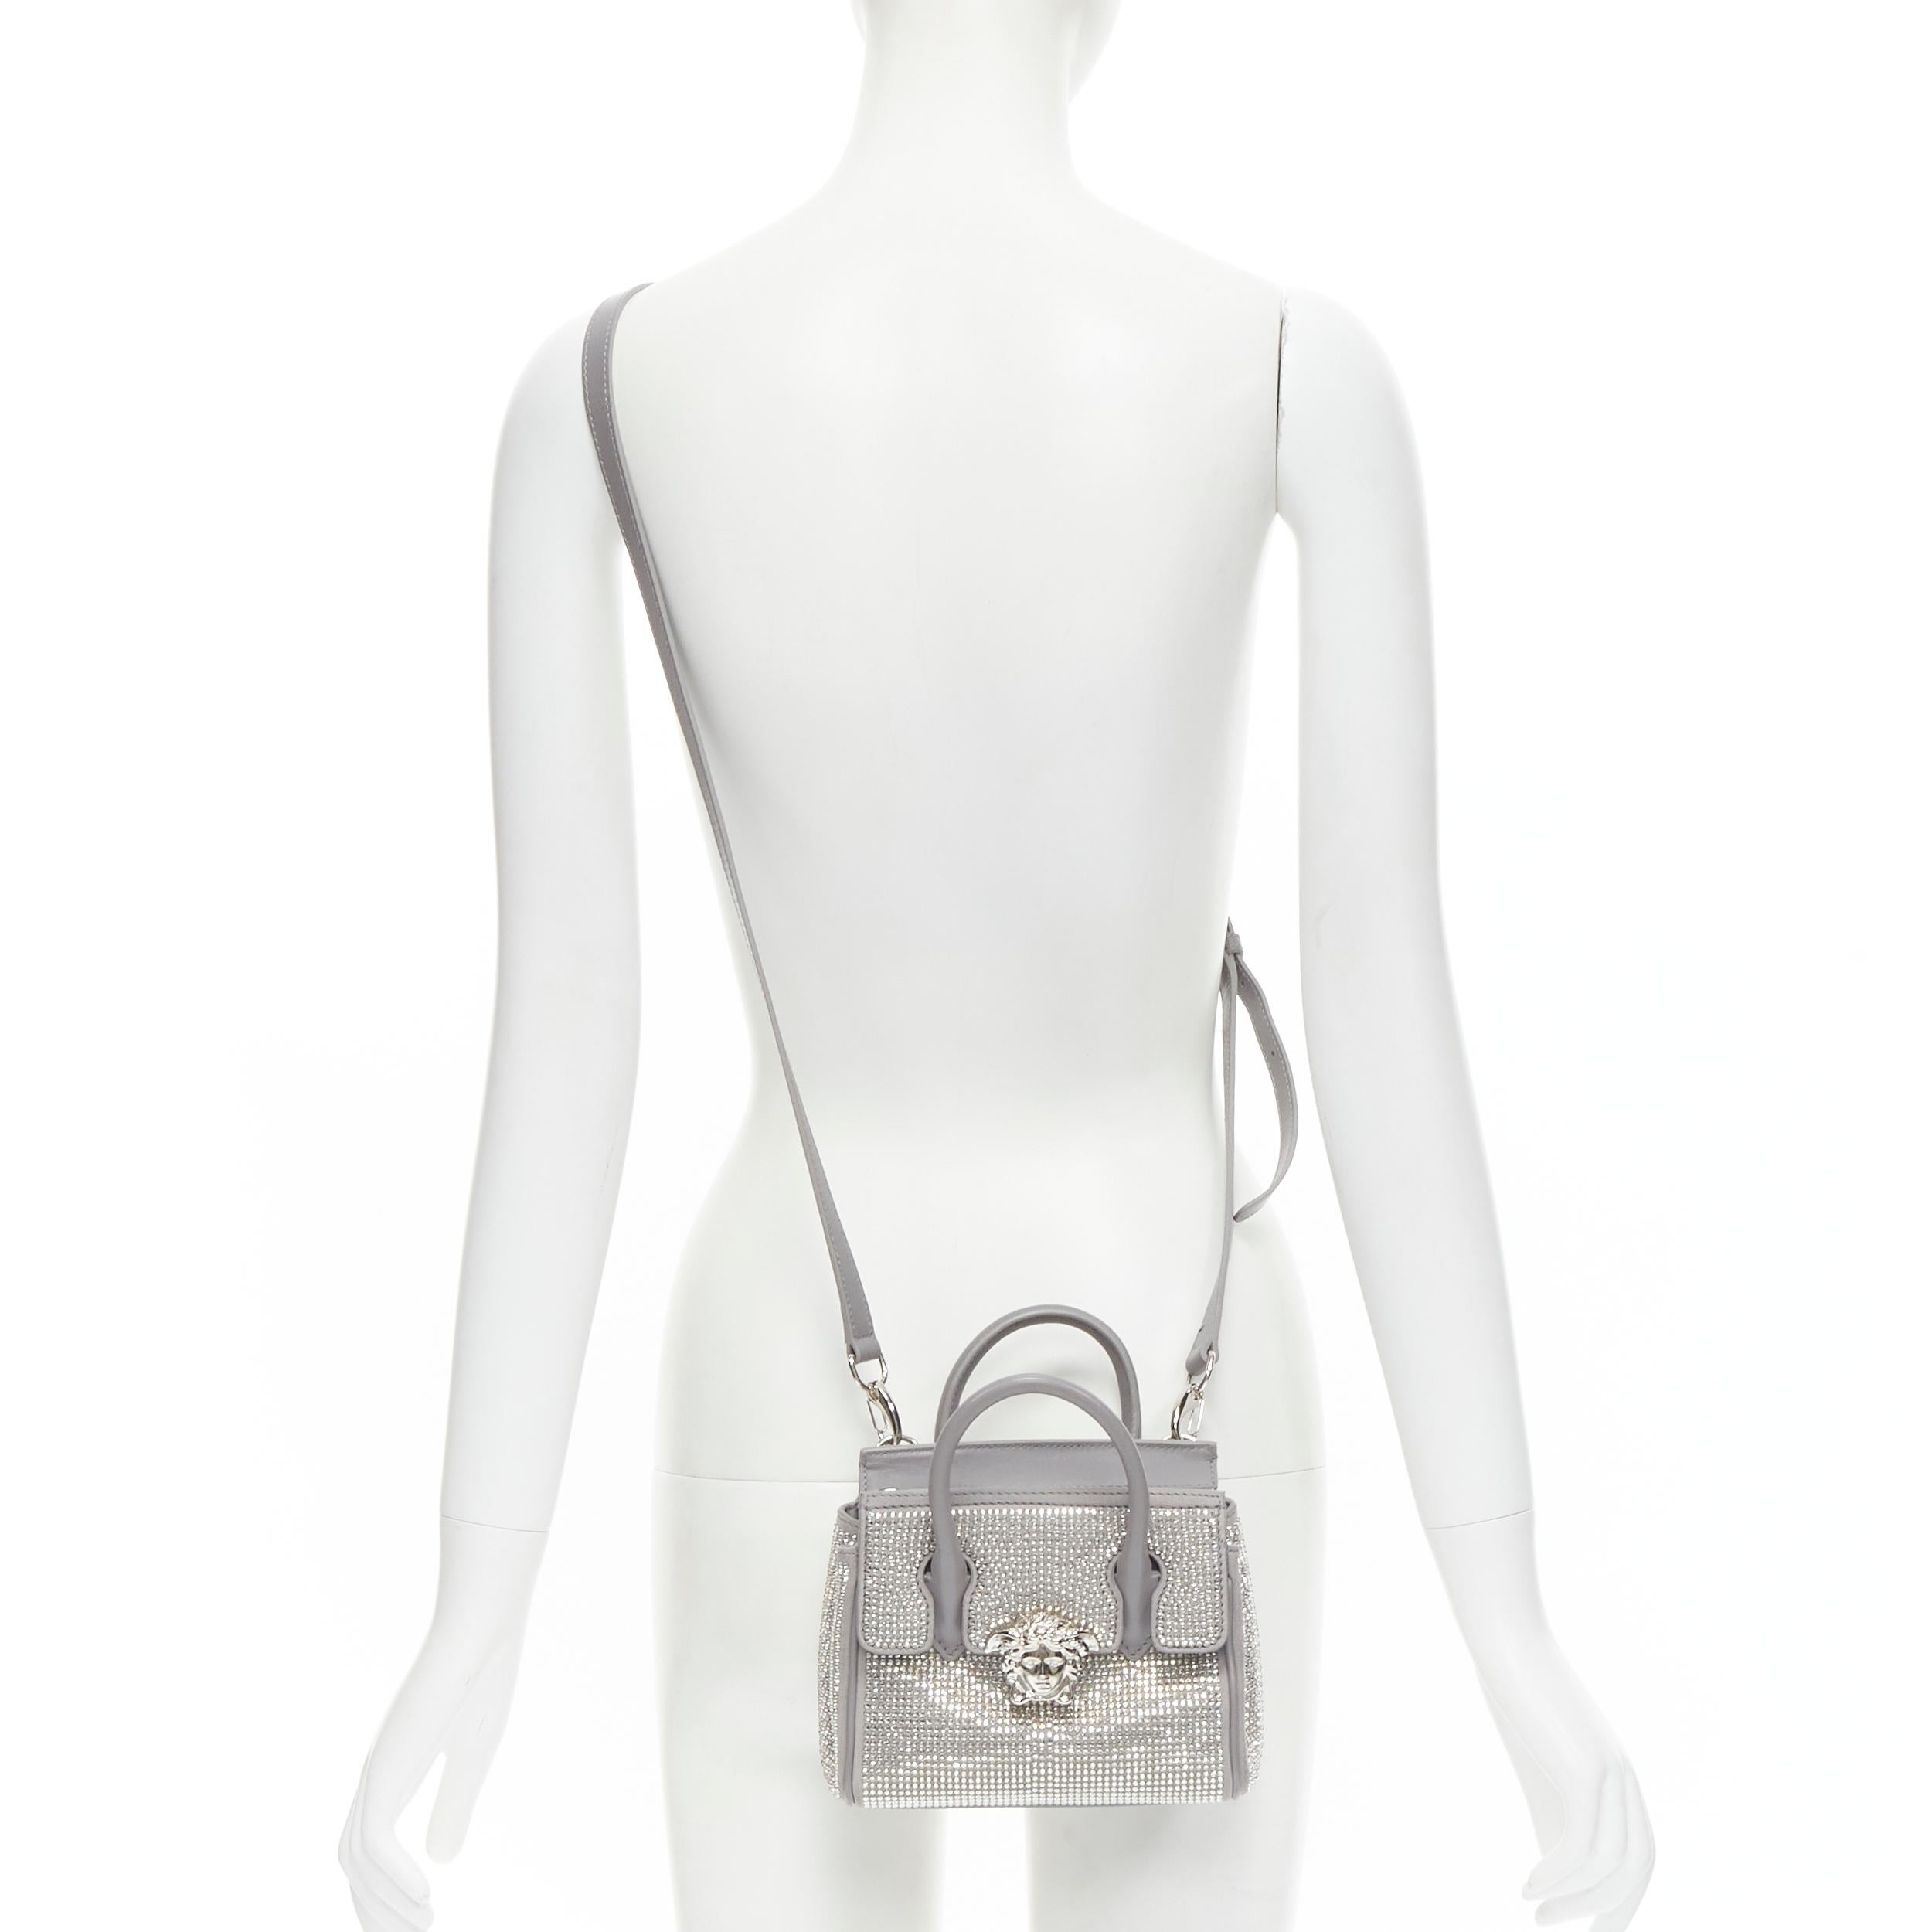 new VERSACE Palazzo Empire Mini Limited Edition grey crystal crossbody bag 
Reference: CNLE/A00151 
Brand: Versace 
Designer: Donatella Versace 
Model: Empire Mini 
Material: Leather 
Color: Grey 
Pattern: Solid 
Closure: Zip 
Extra Detail: This